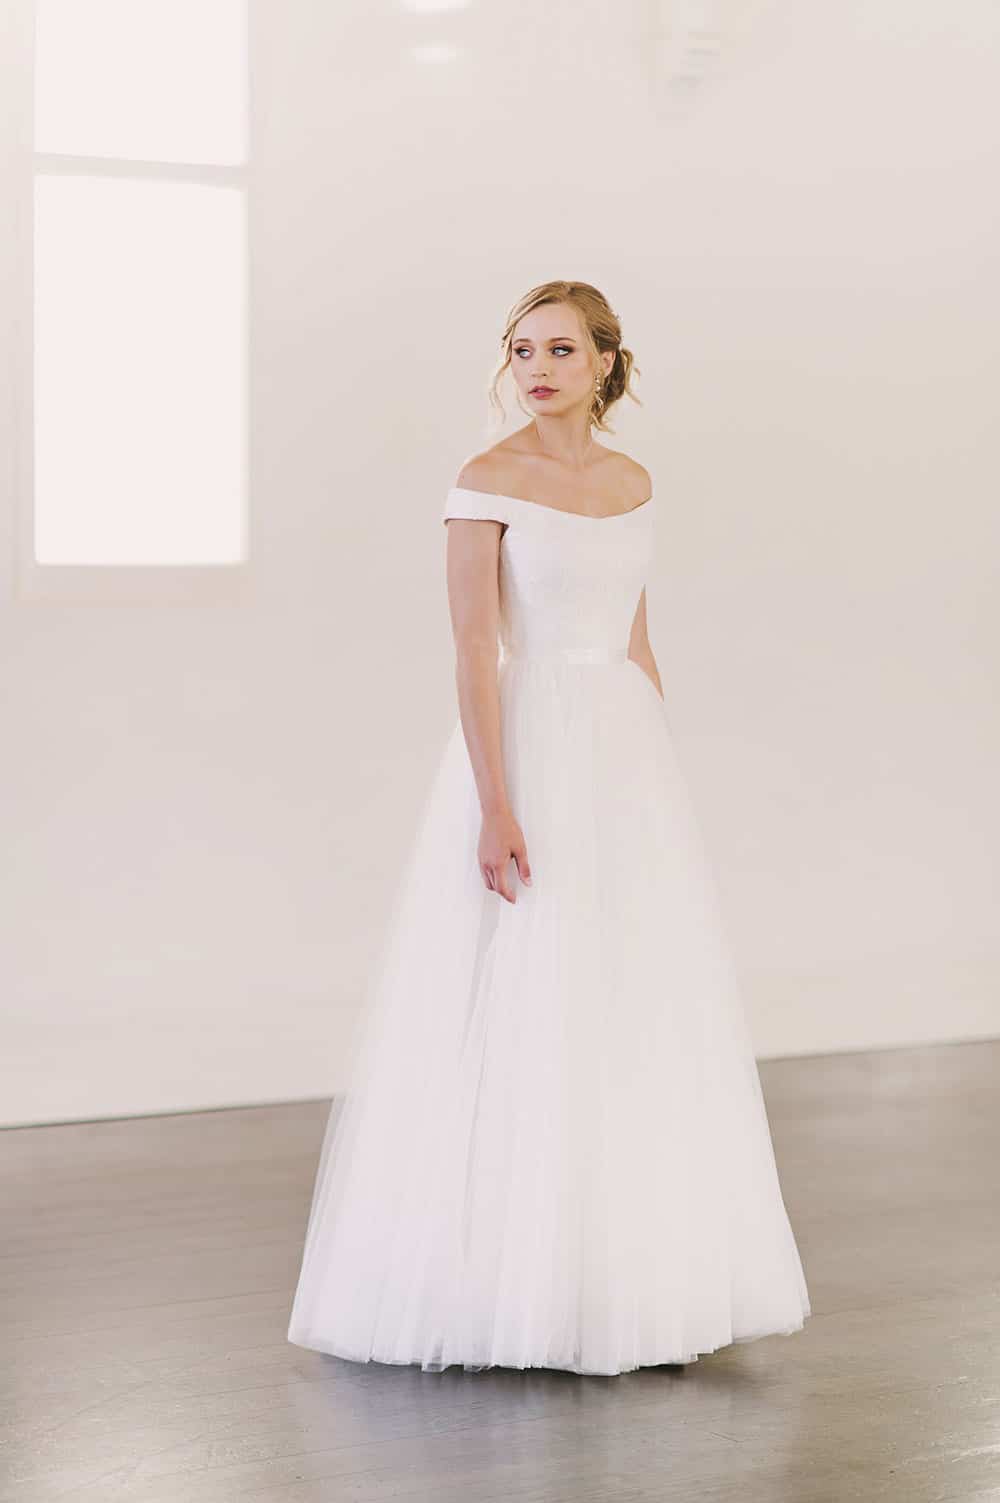 The Eliza gown from Wendy Makin's Ready to Wear collection